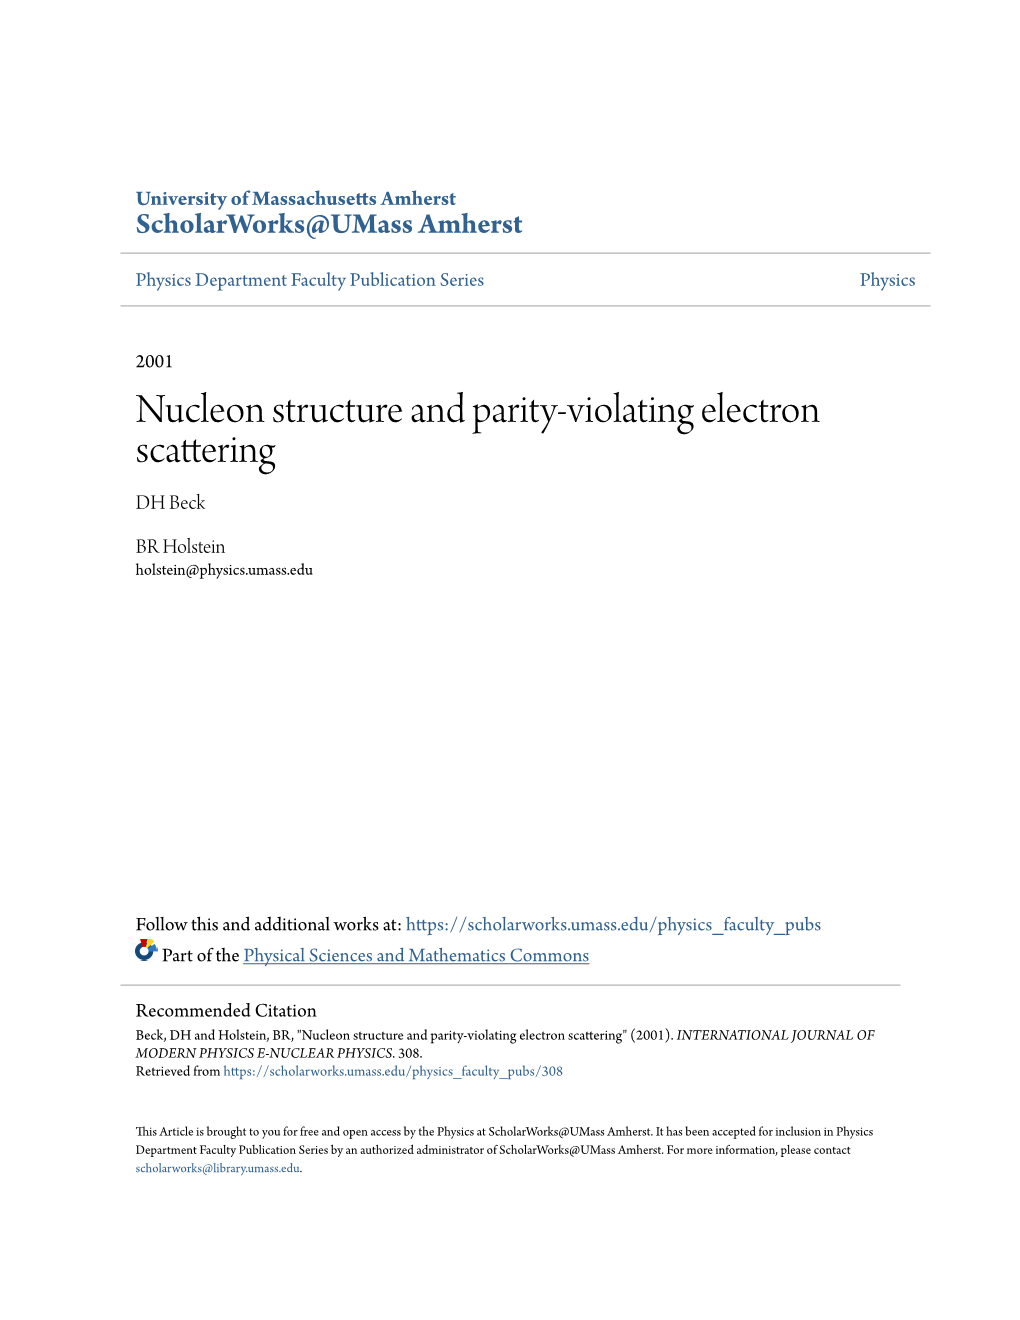 Nucleon Structure and Parity-Violating Electron Scattering DH Beck